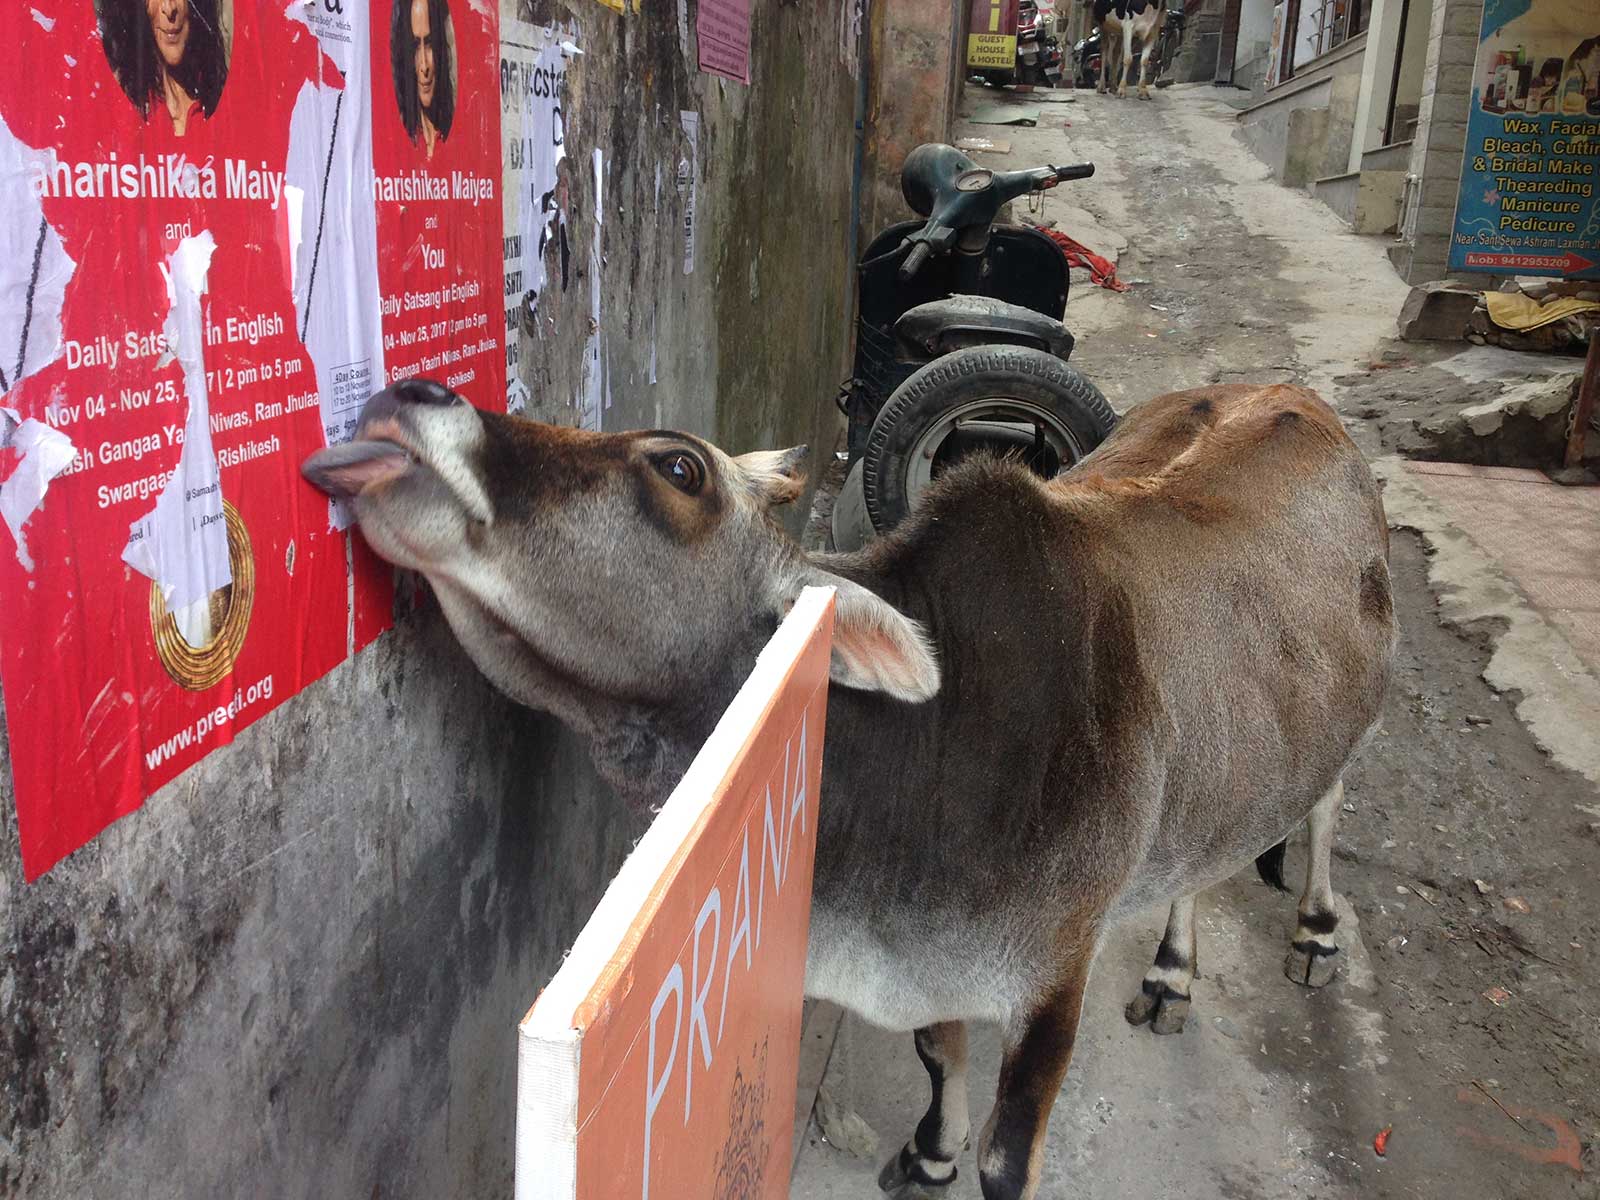 Cows on the streets of Rishikesh